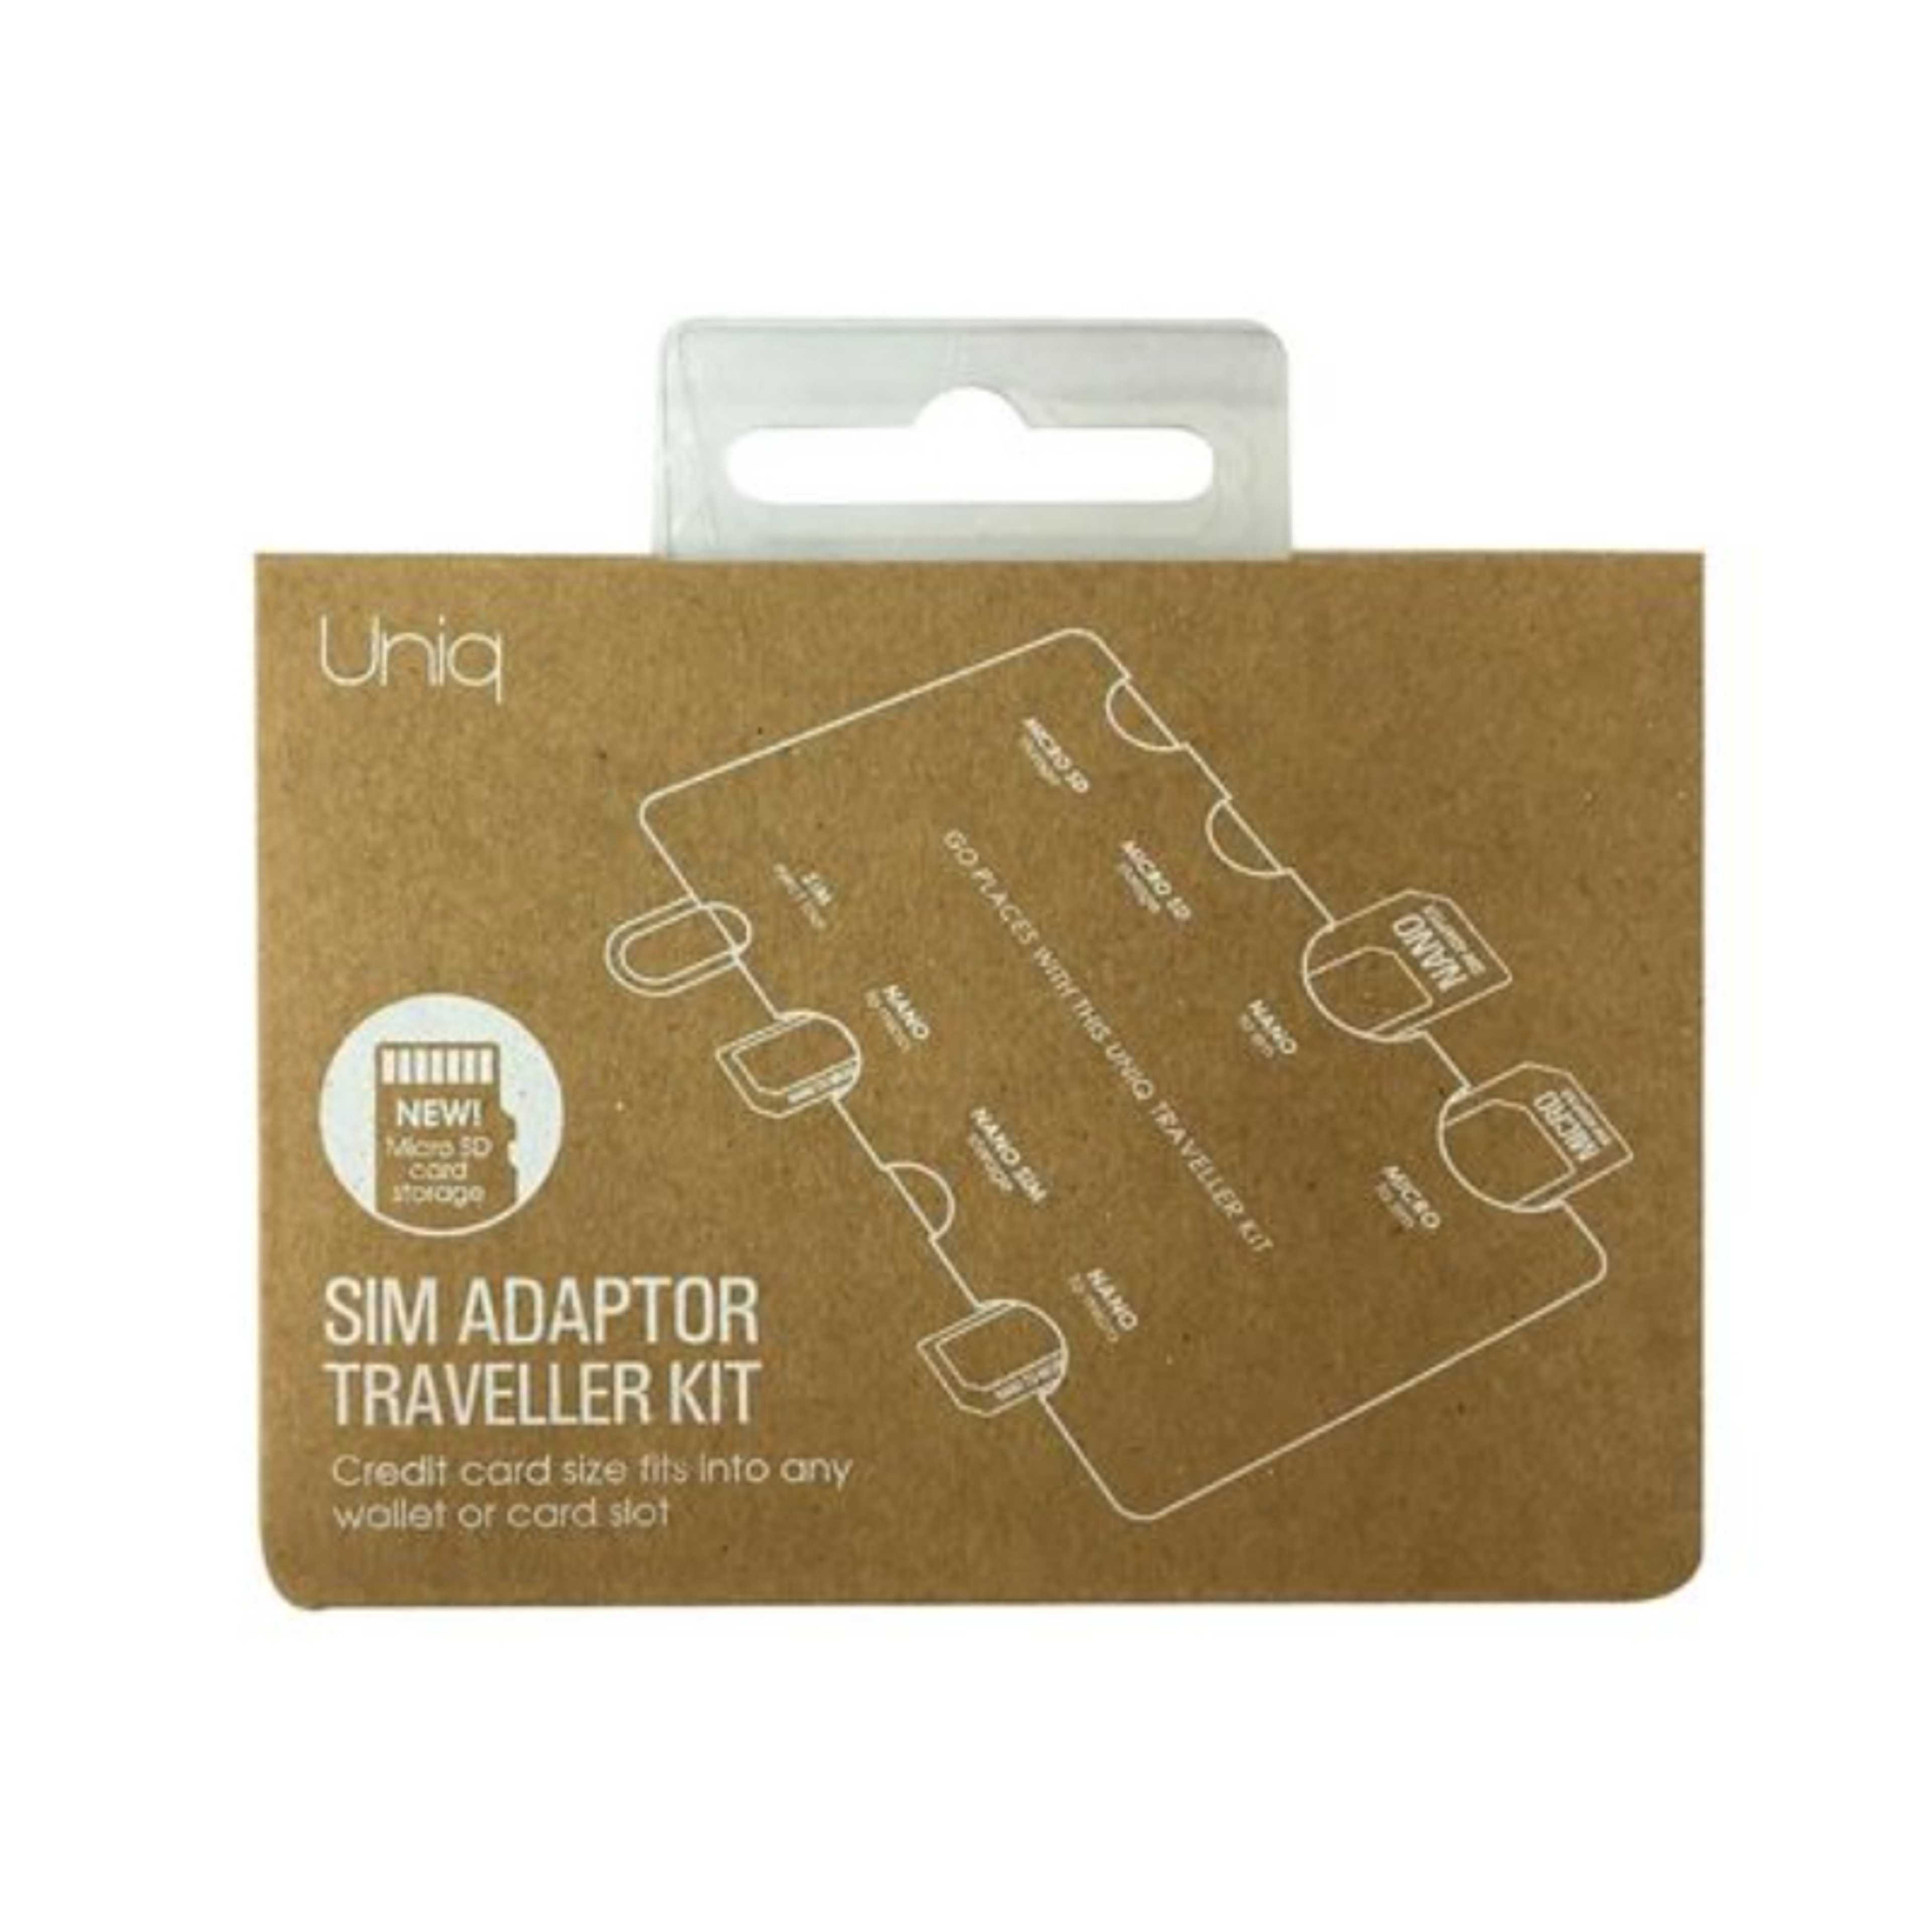 UNIQ 7in 1 SIM Adaptor Traveler Kit with Micro SD Cards Storage (Credit-card sized)